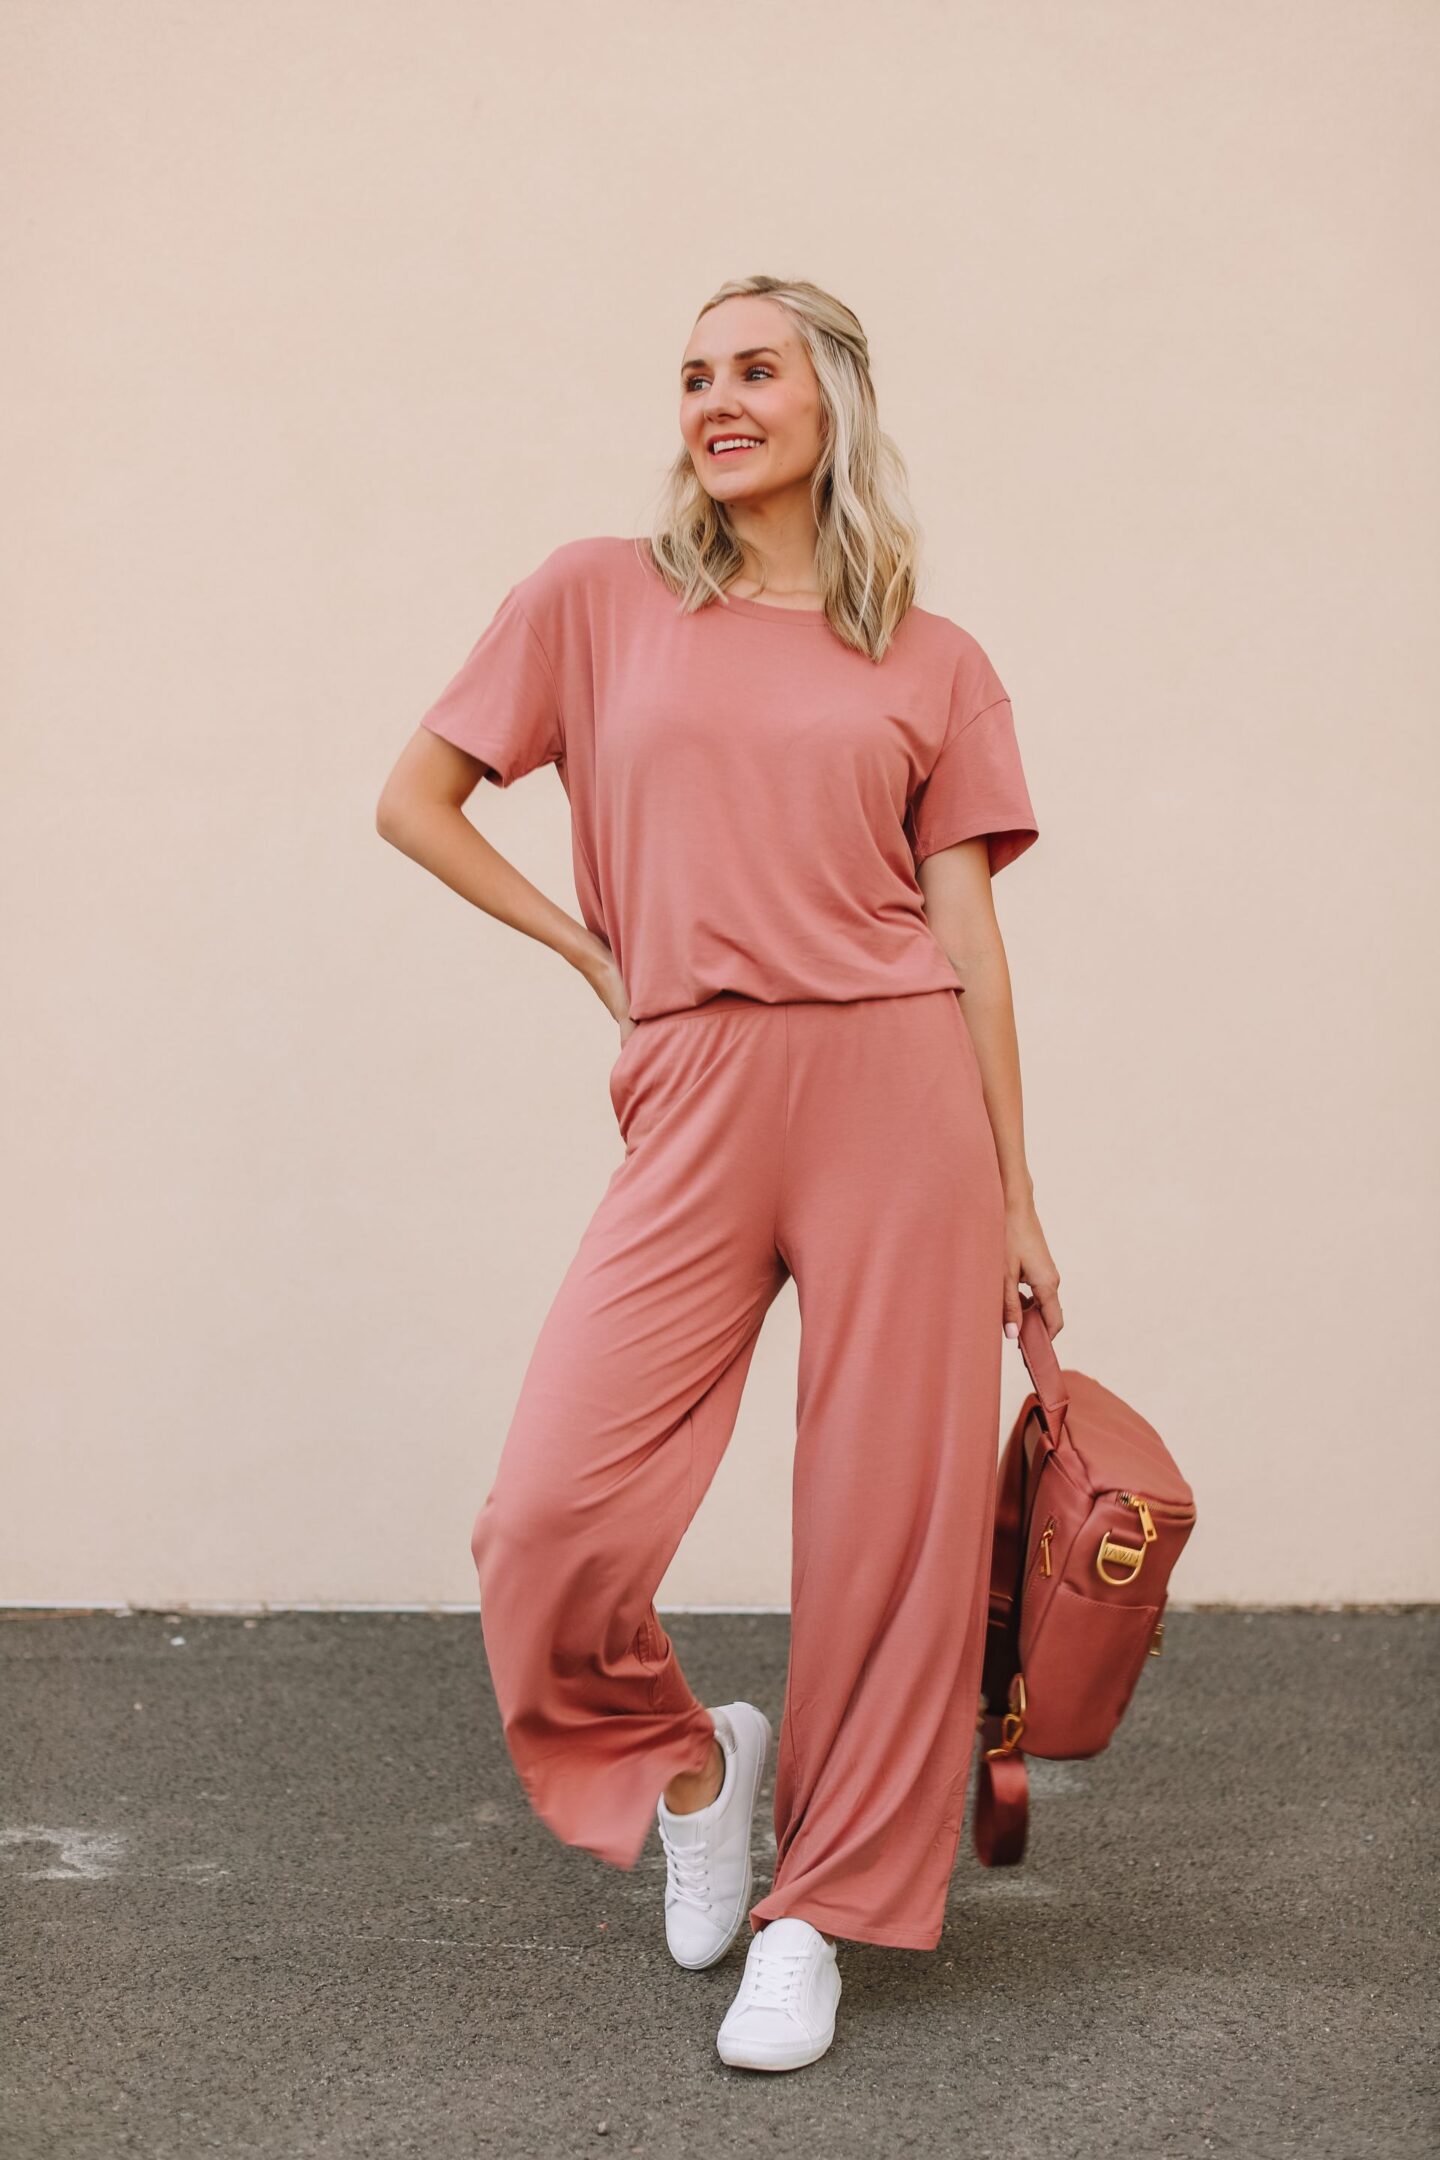 3 ways to style a matching loungewear set for summer